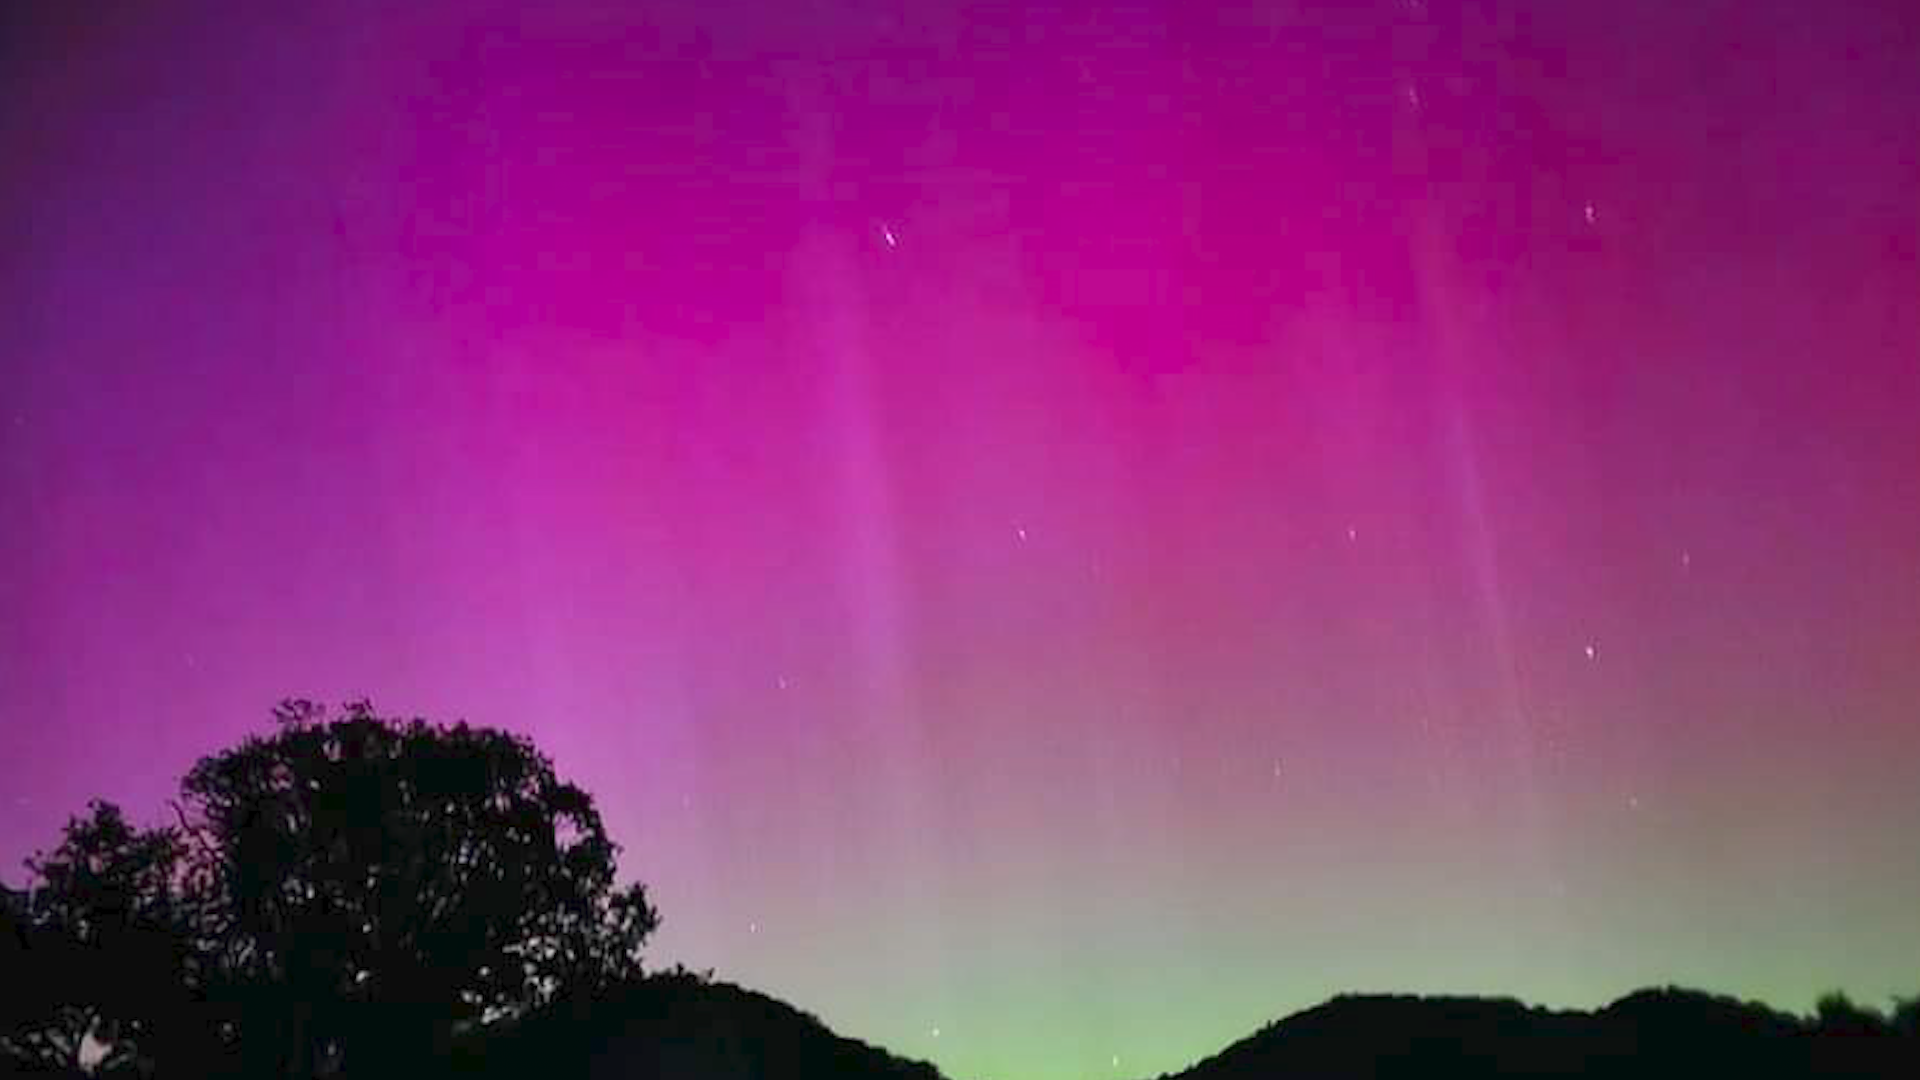 The northern lights could also be seen from Pauma.